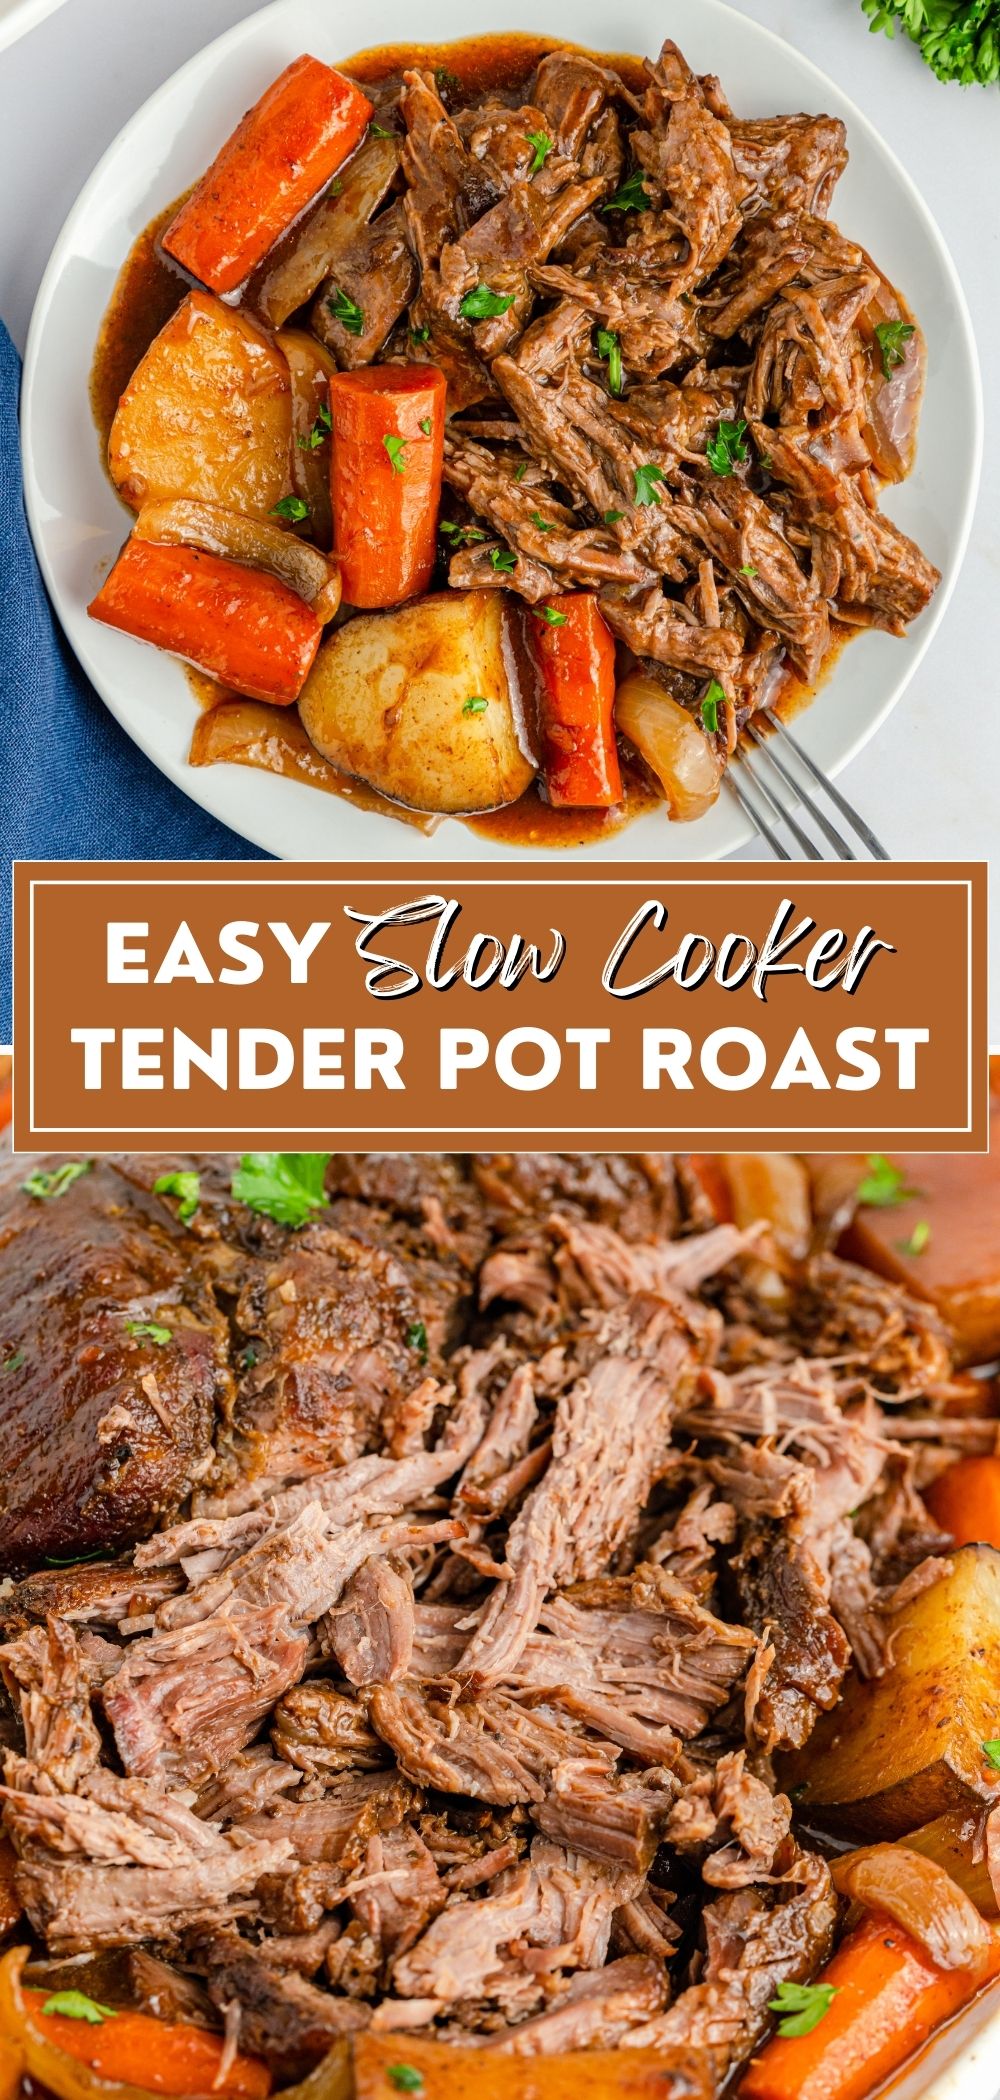 This delicious and tender pot roast recipe is so easy to make using your slow cooker or crock pot. The meat just falls apart and is covered in gravy. It's a family favorite dinner in my house! via @skinnydesserts